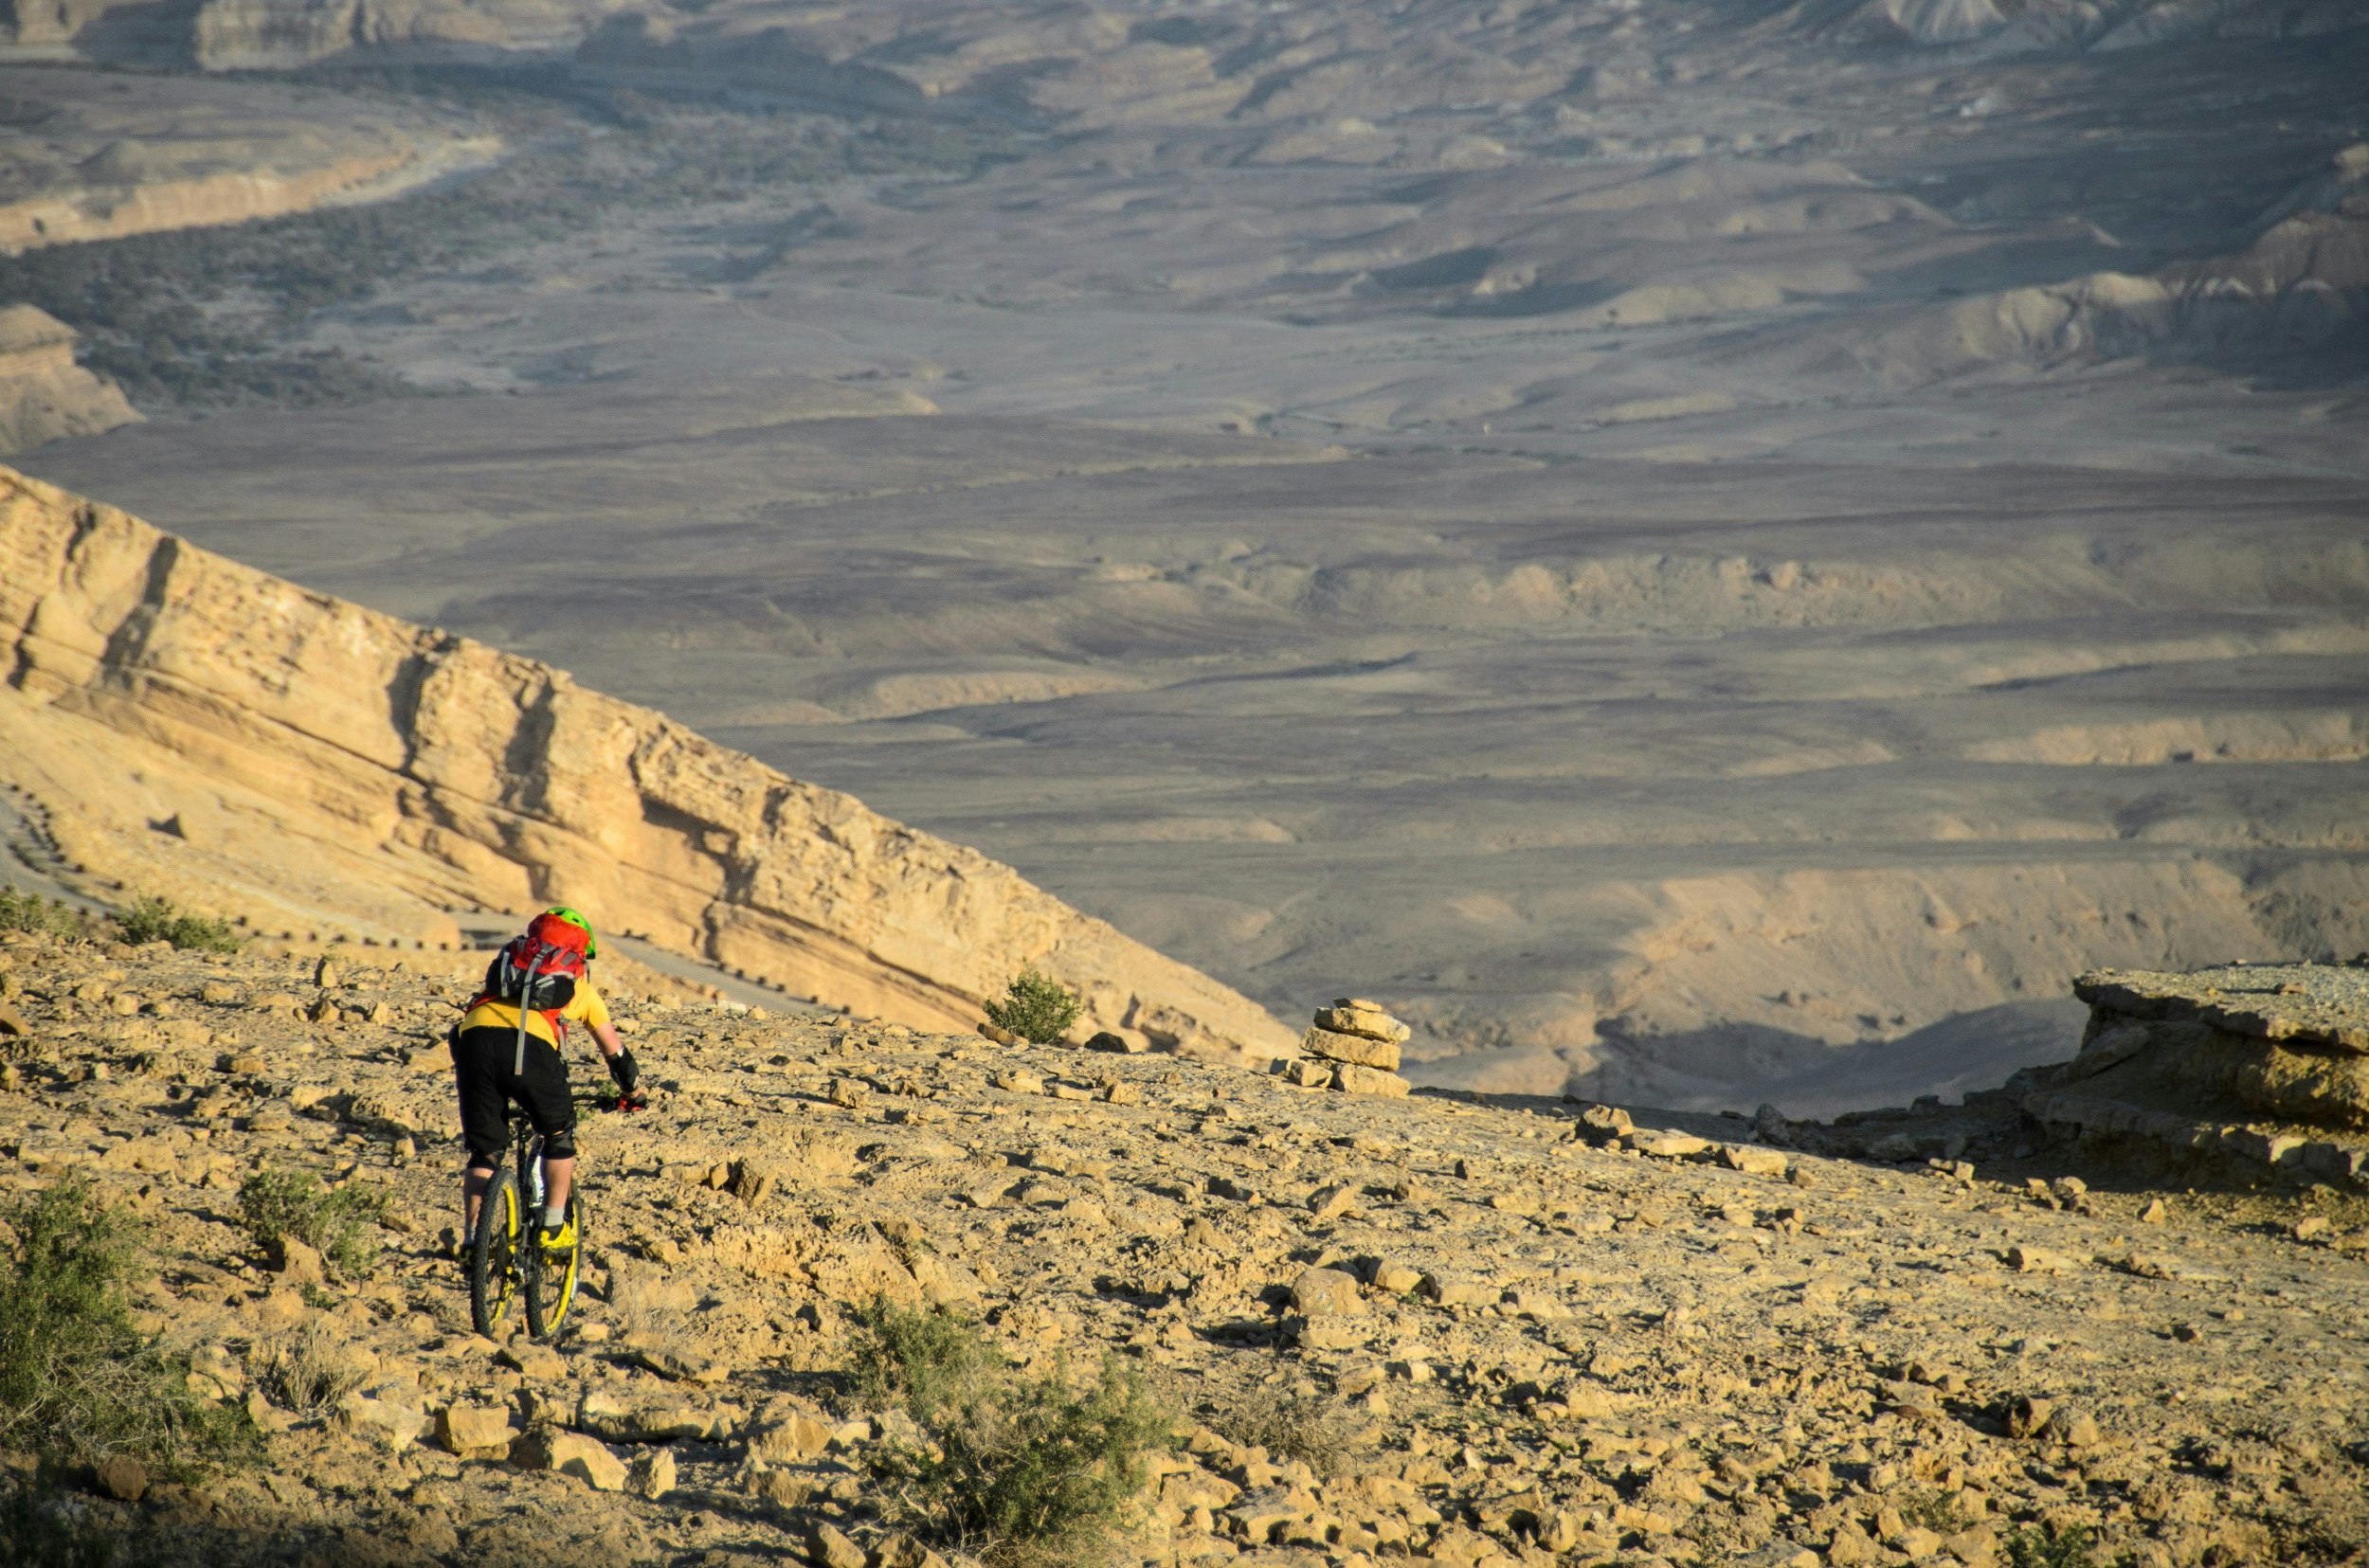 A lone mountain biker gets ready to descend from a mountain to the desert floor far below.